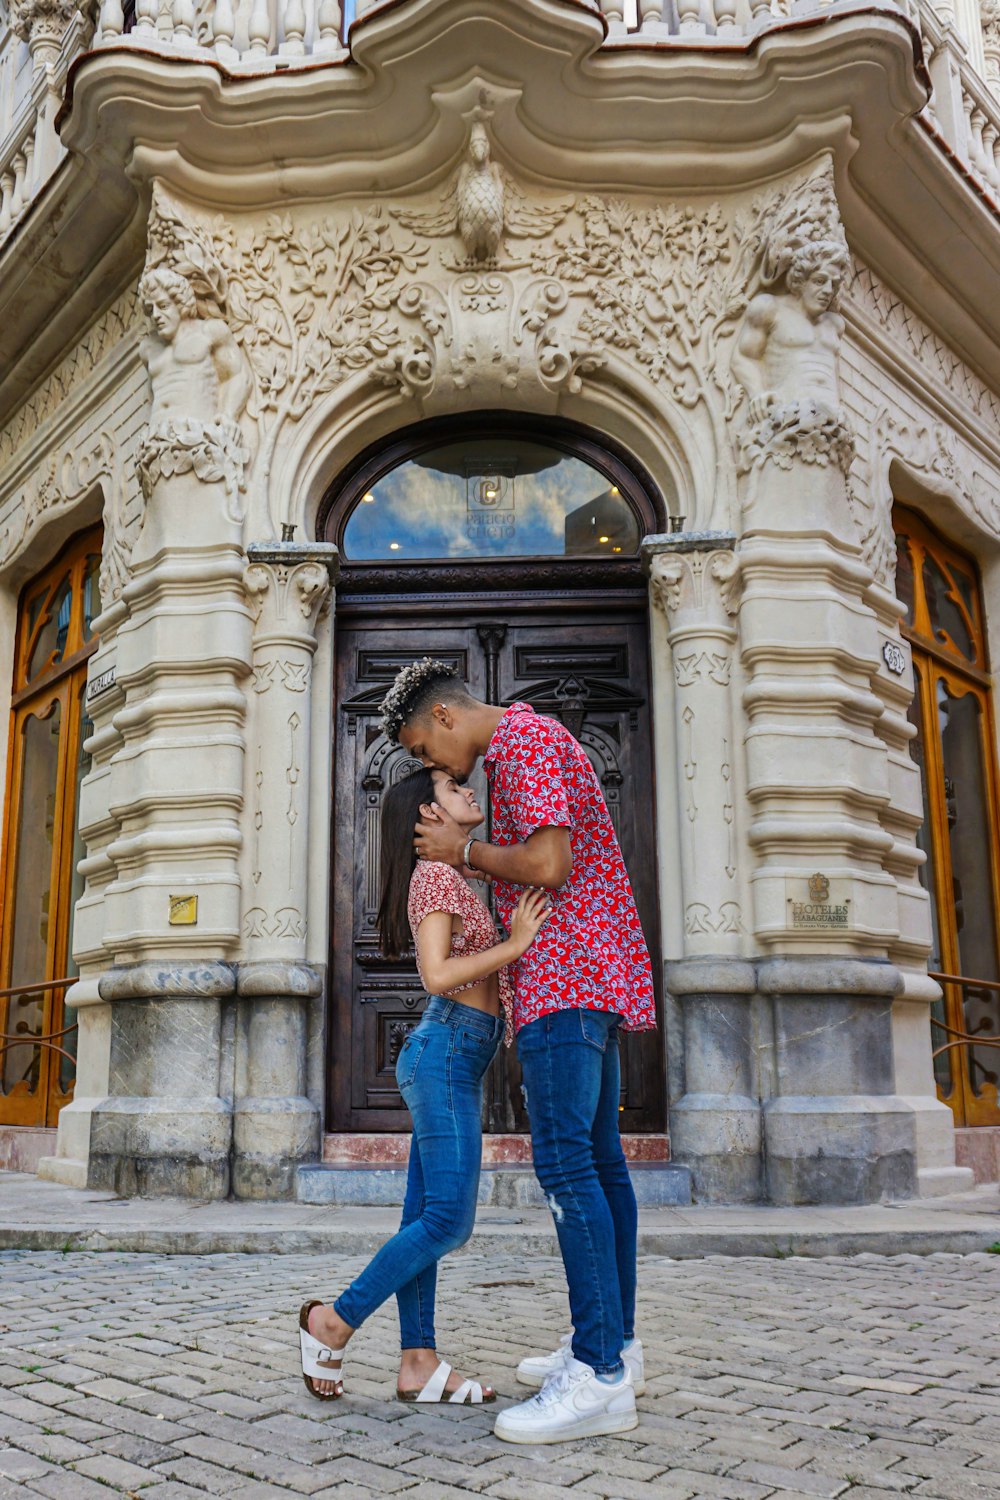 a man and woman kissing in front of a building